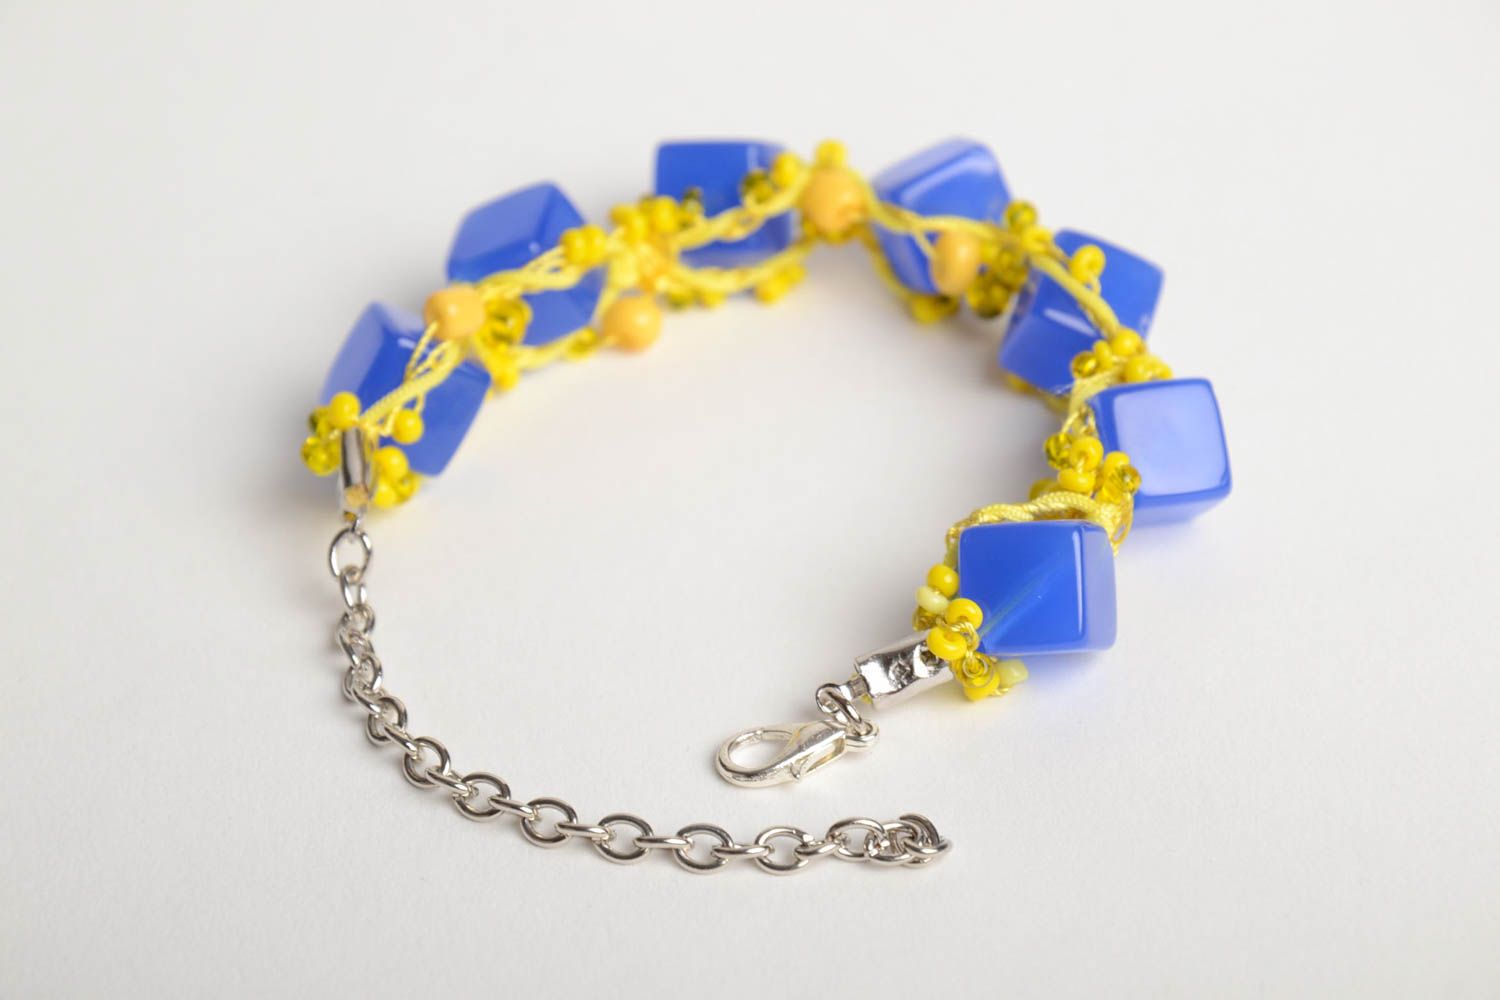 Handmade wrist bracelet crocheted of beads in yellow and blue color combination photo 4